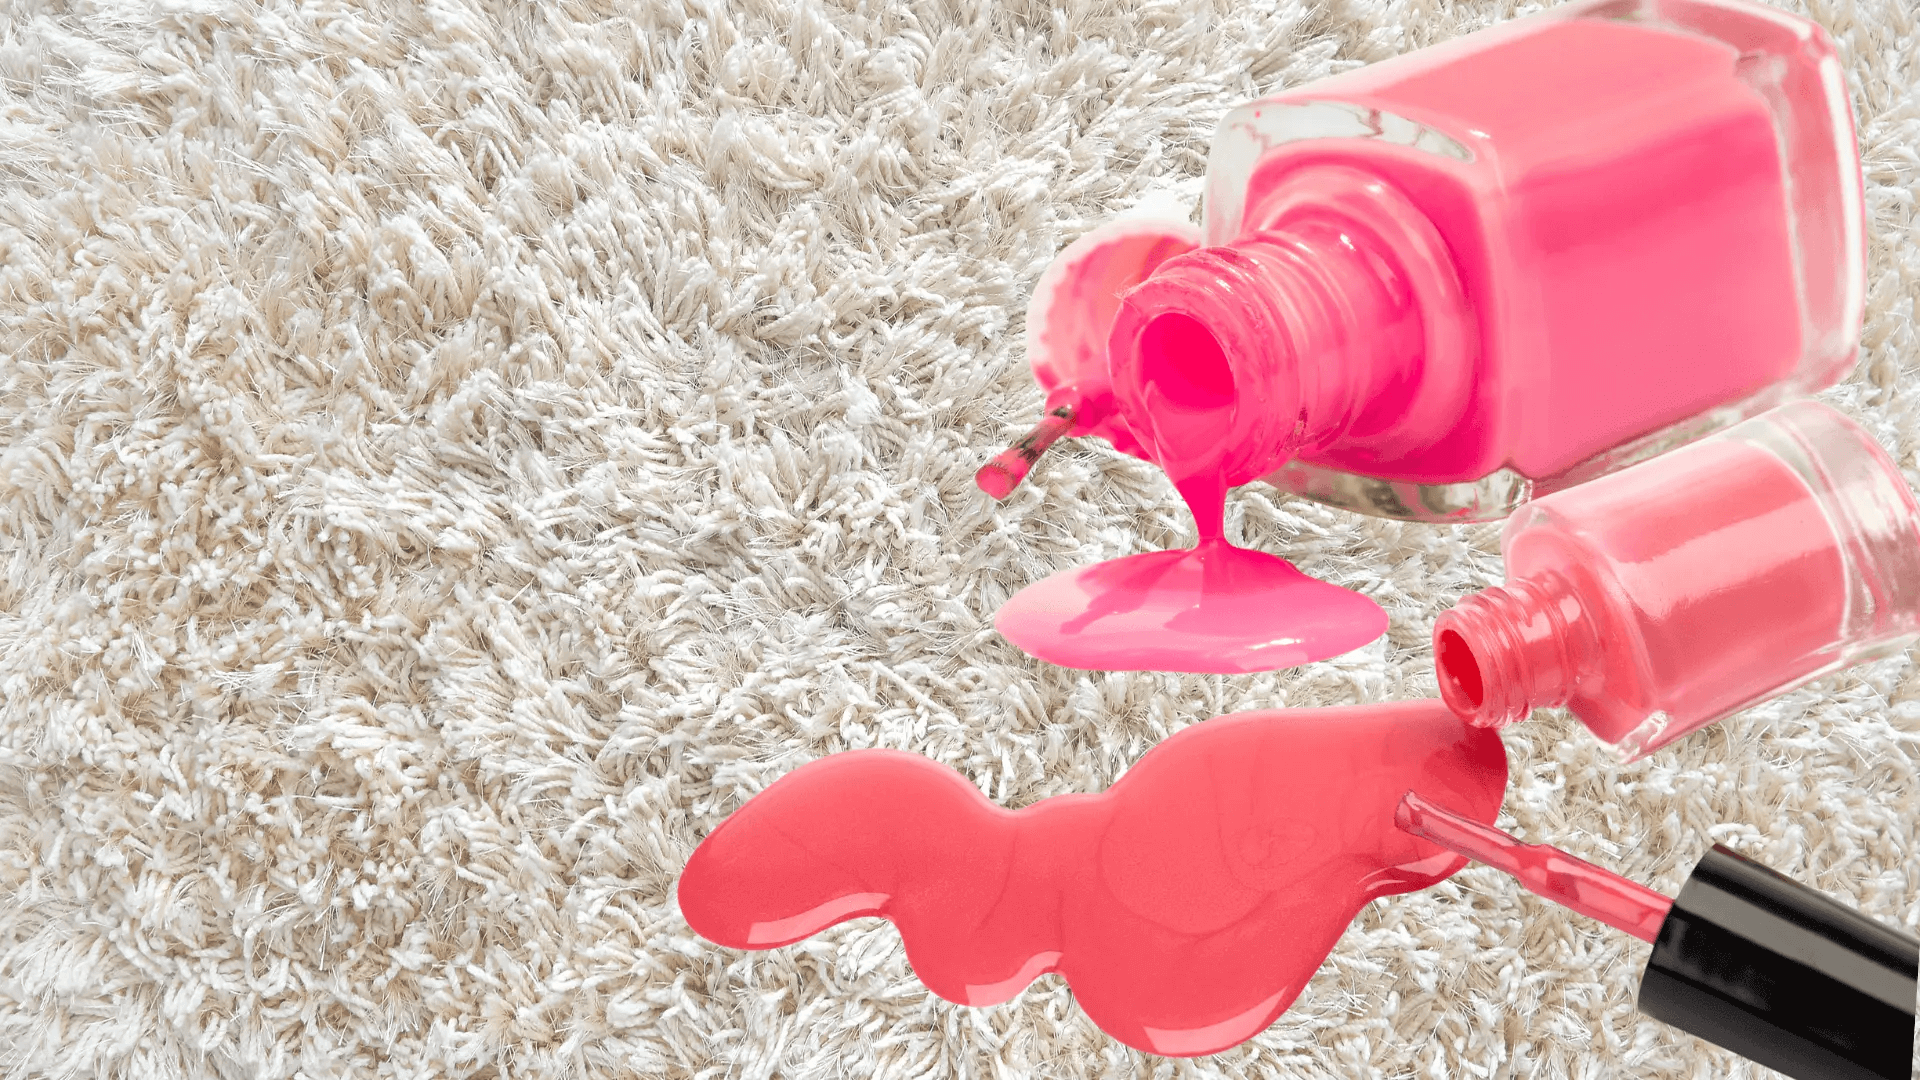 How to Get Nail Polish Out of Carpet